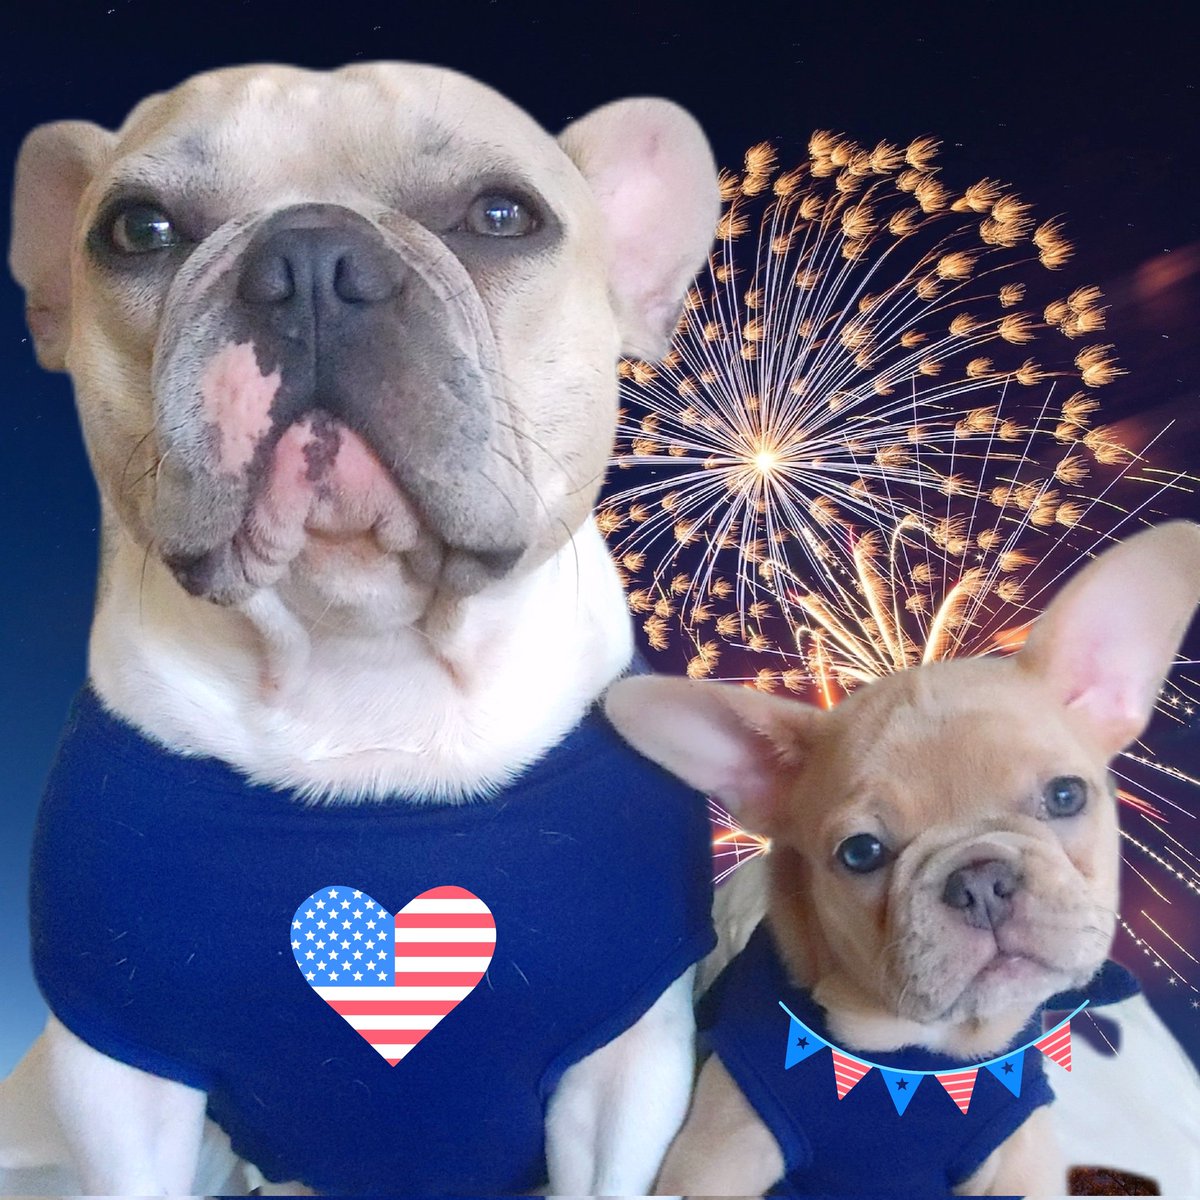 Mama Olive and Babette wishing everyone a Happy 4th of July weekend #4thofJulyWeekend #dogsoftwitter #opener2022